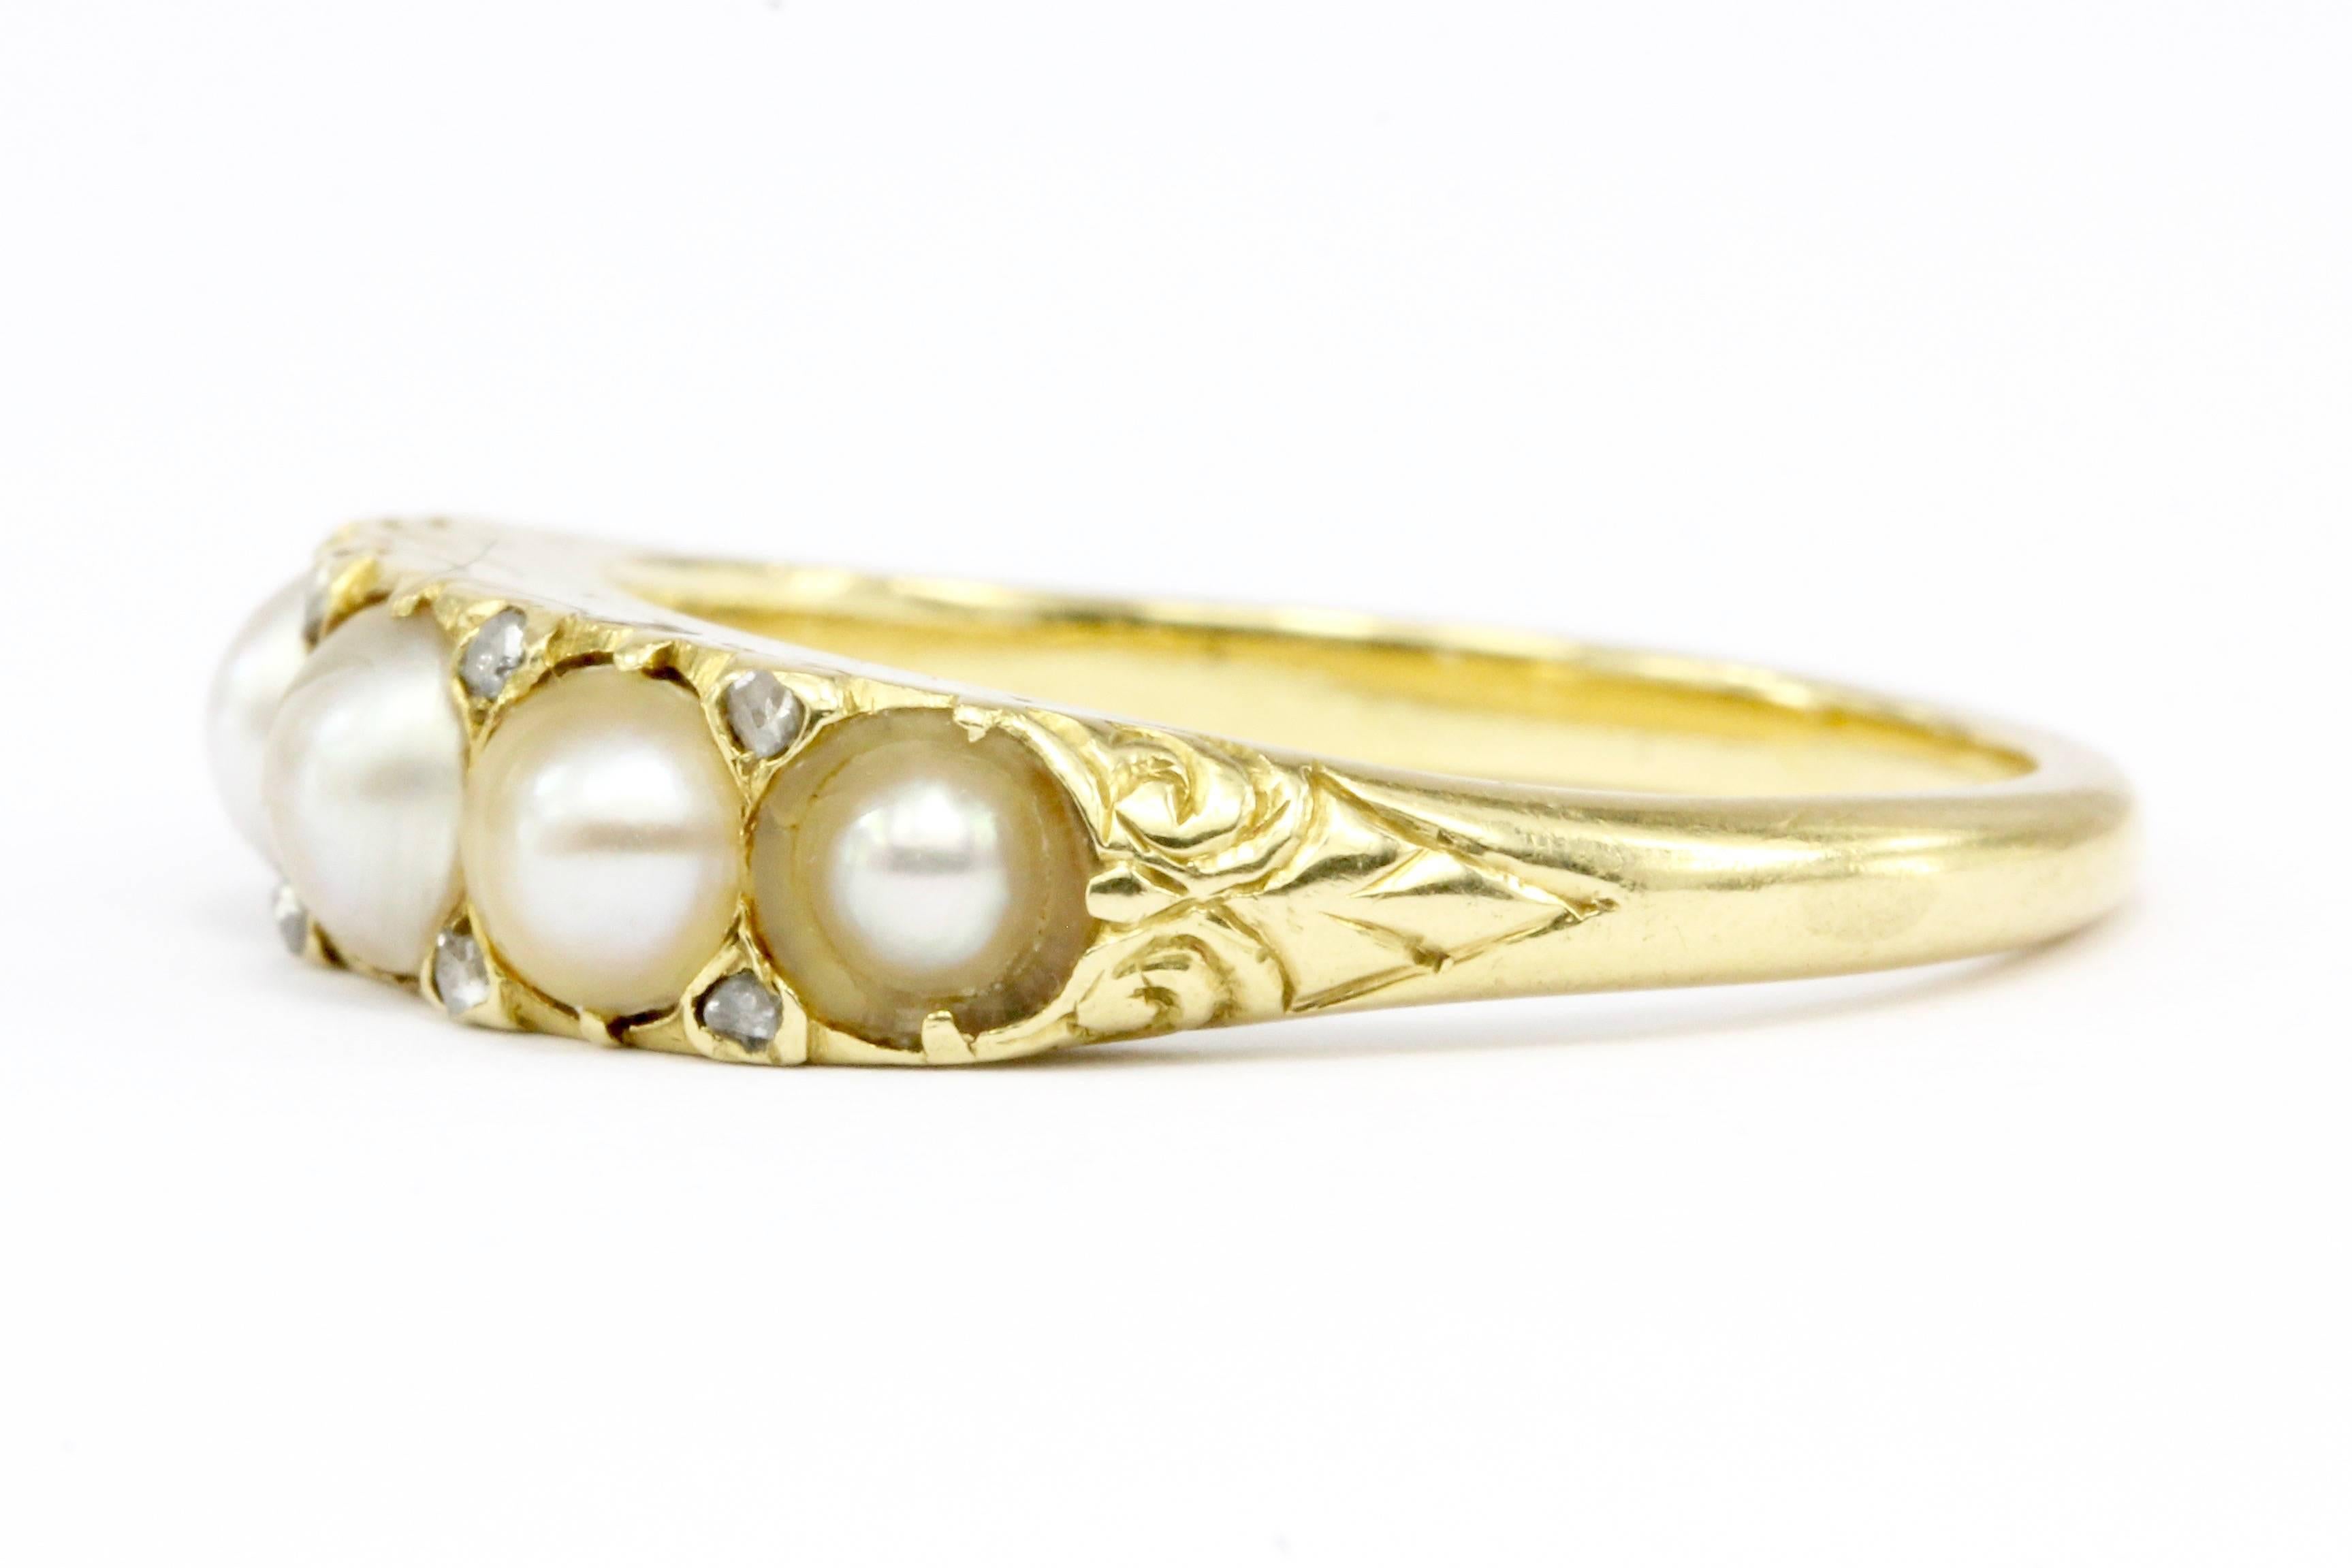 Era: Victorian c. 1890

Composition: 18K Yellow Gold 

Hallmark: Designates it was assayed for sale in Portugal after 1886 - not necessarily made in Portugal

Primary Stone: (5x) Natural Pearl (one was replaced)

Accent Stones: (8x) Rose cut diamond